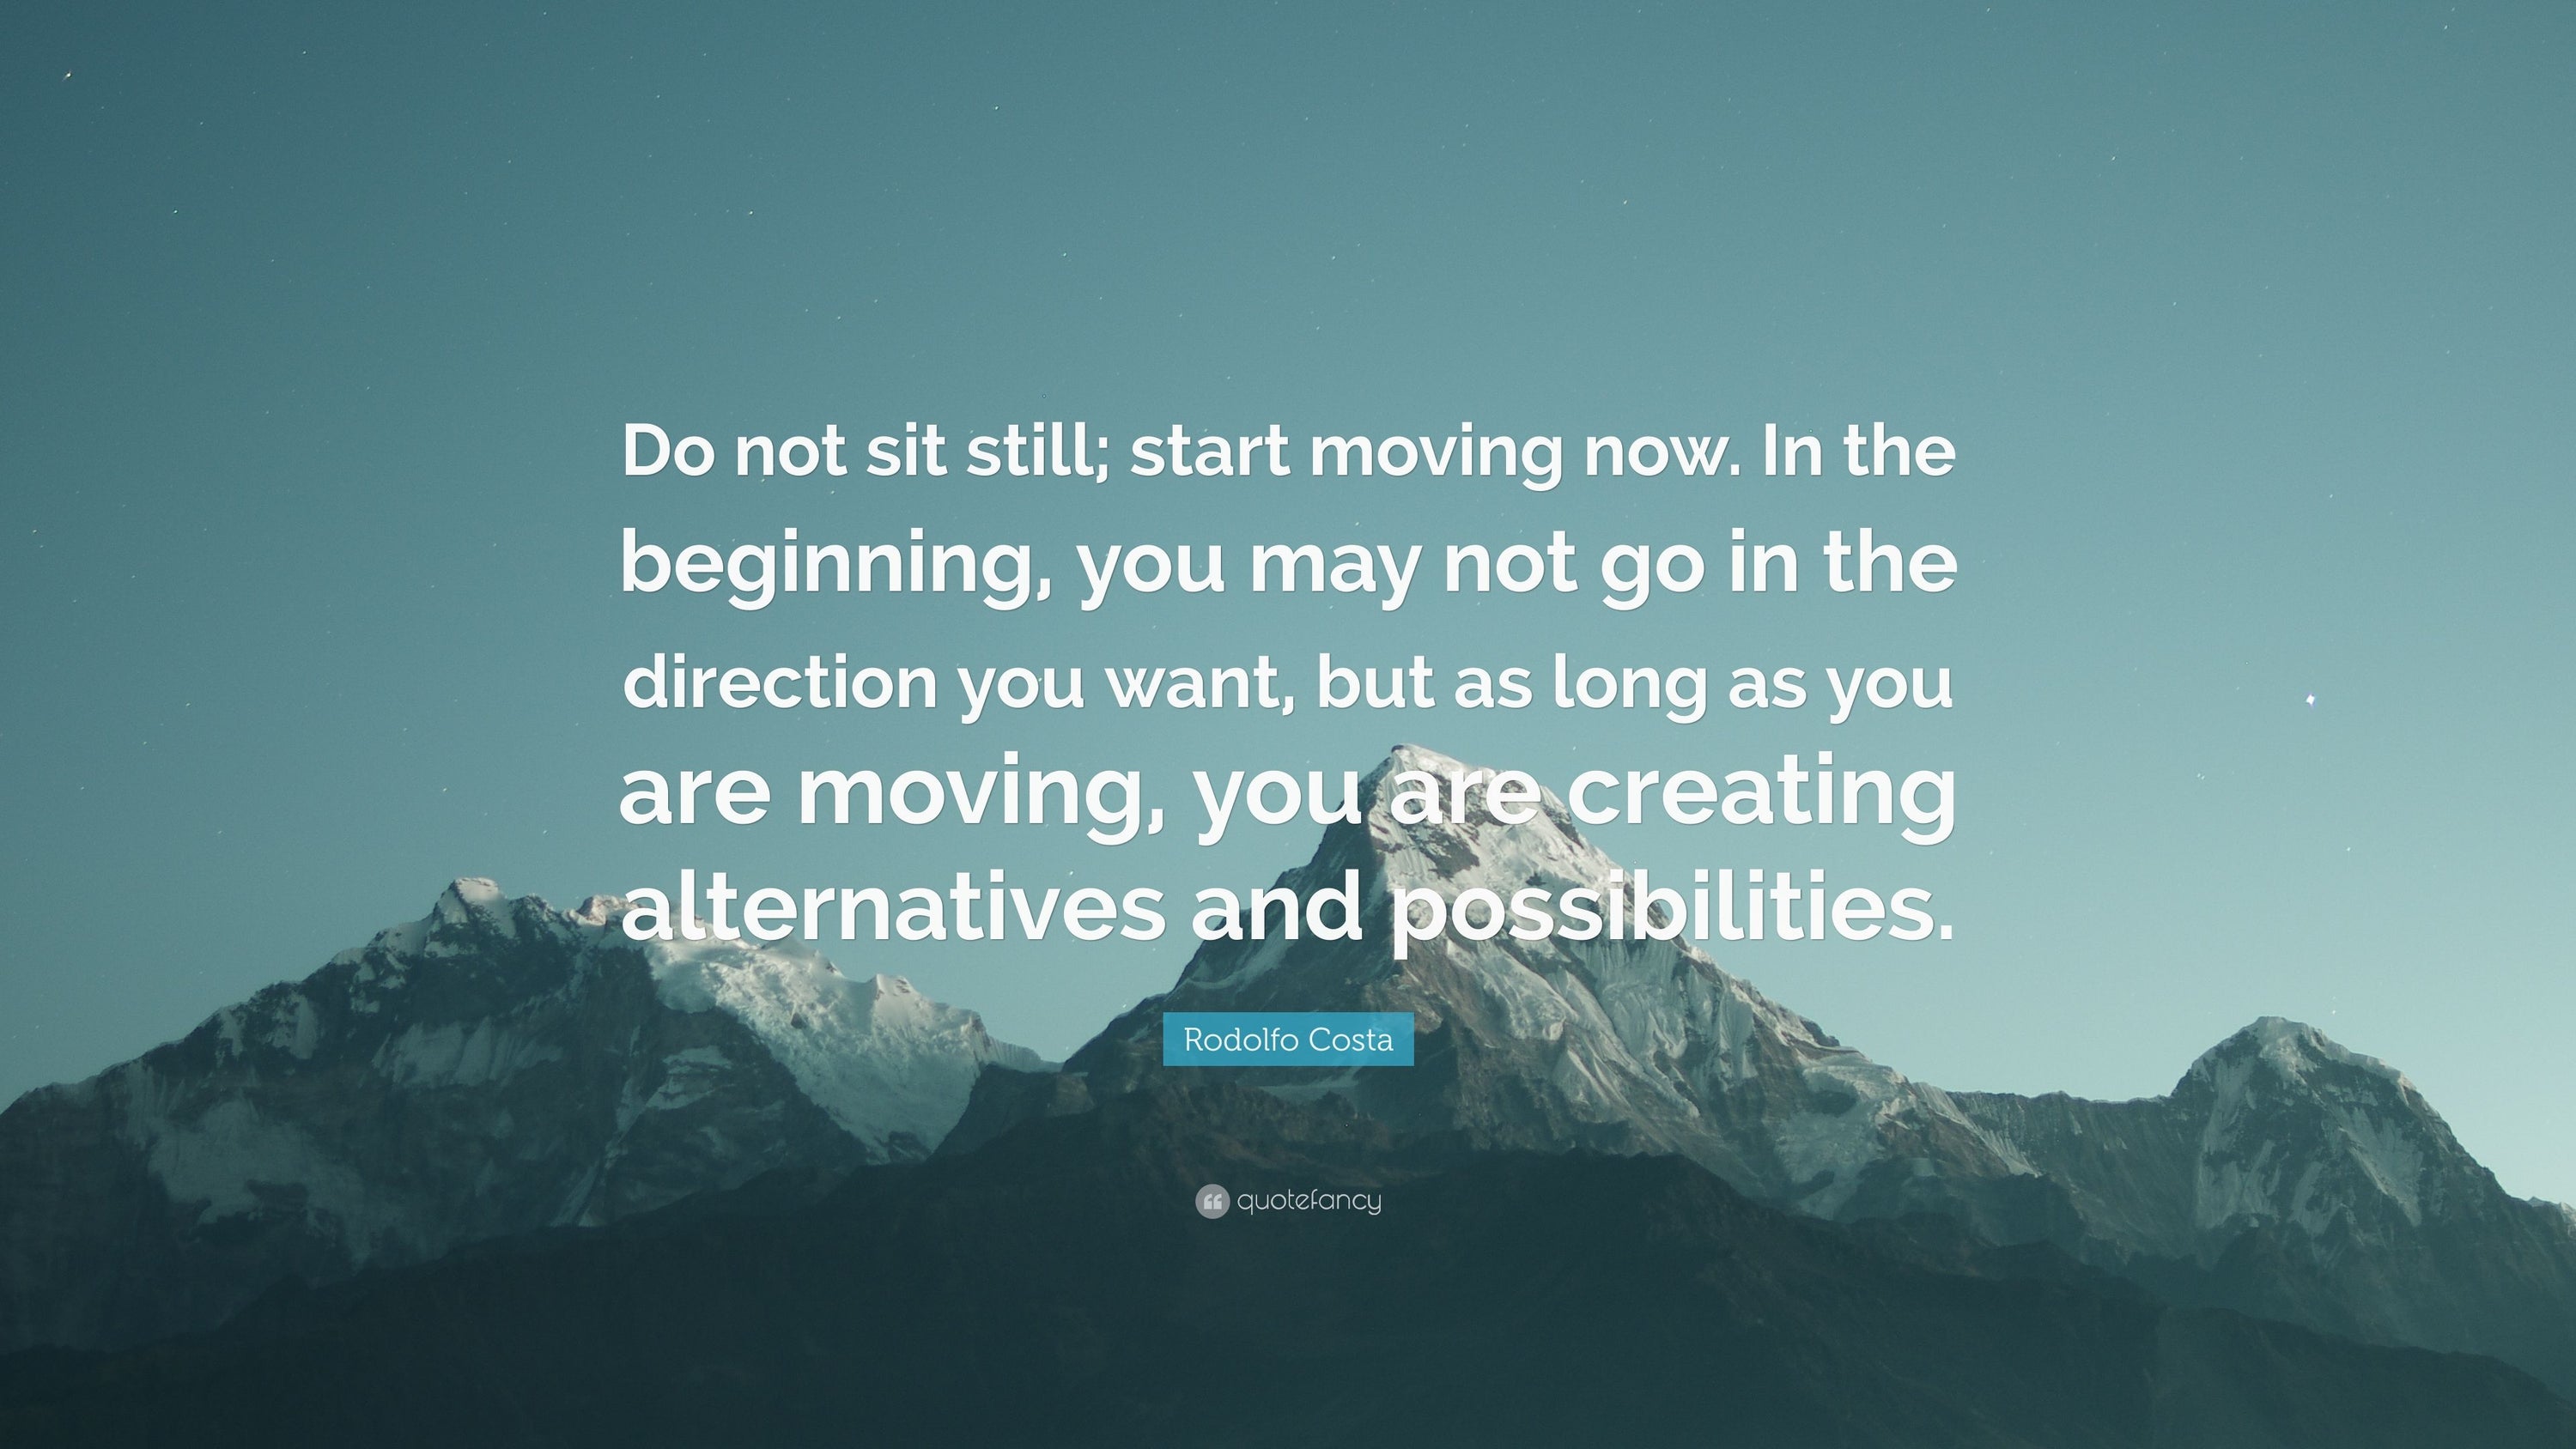 Don’t sit still; start moving. In the beginning, you may not go in the direction that you want but as long as you are moving, you are creating alternatives and possibilities.